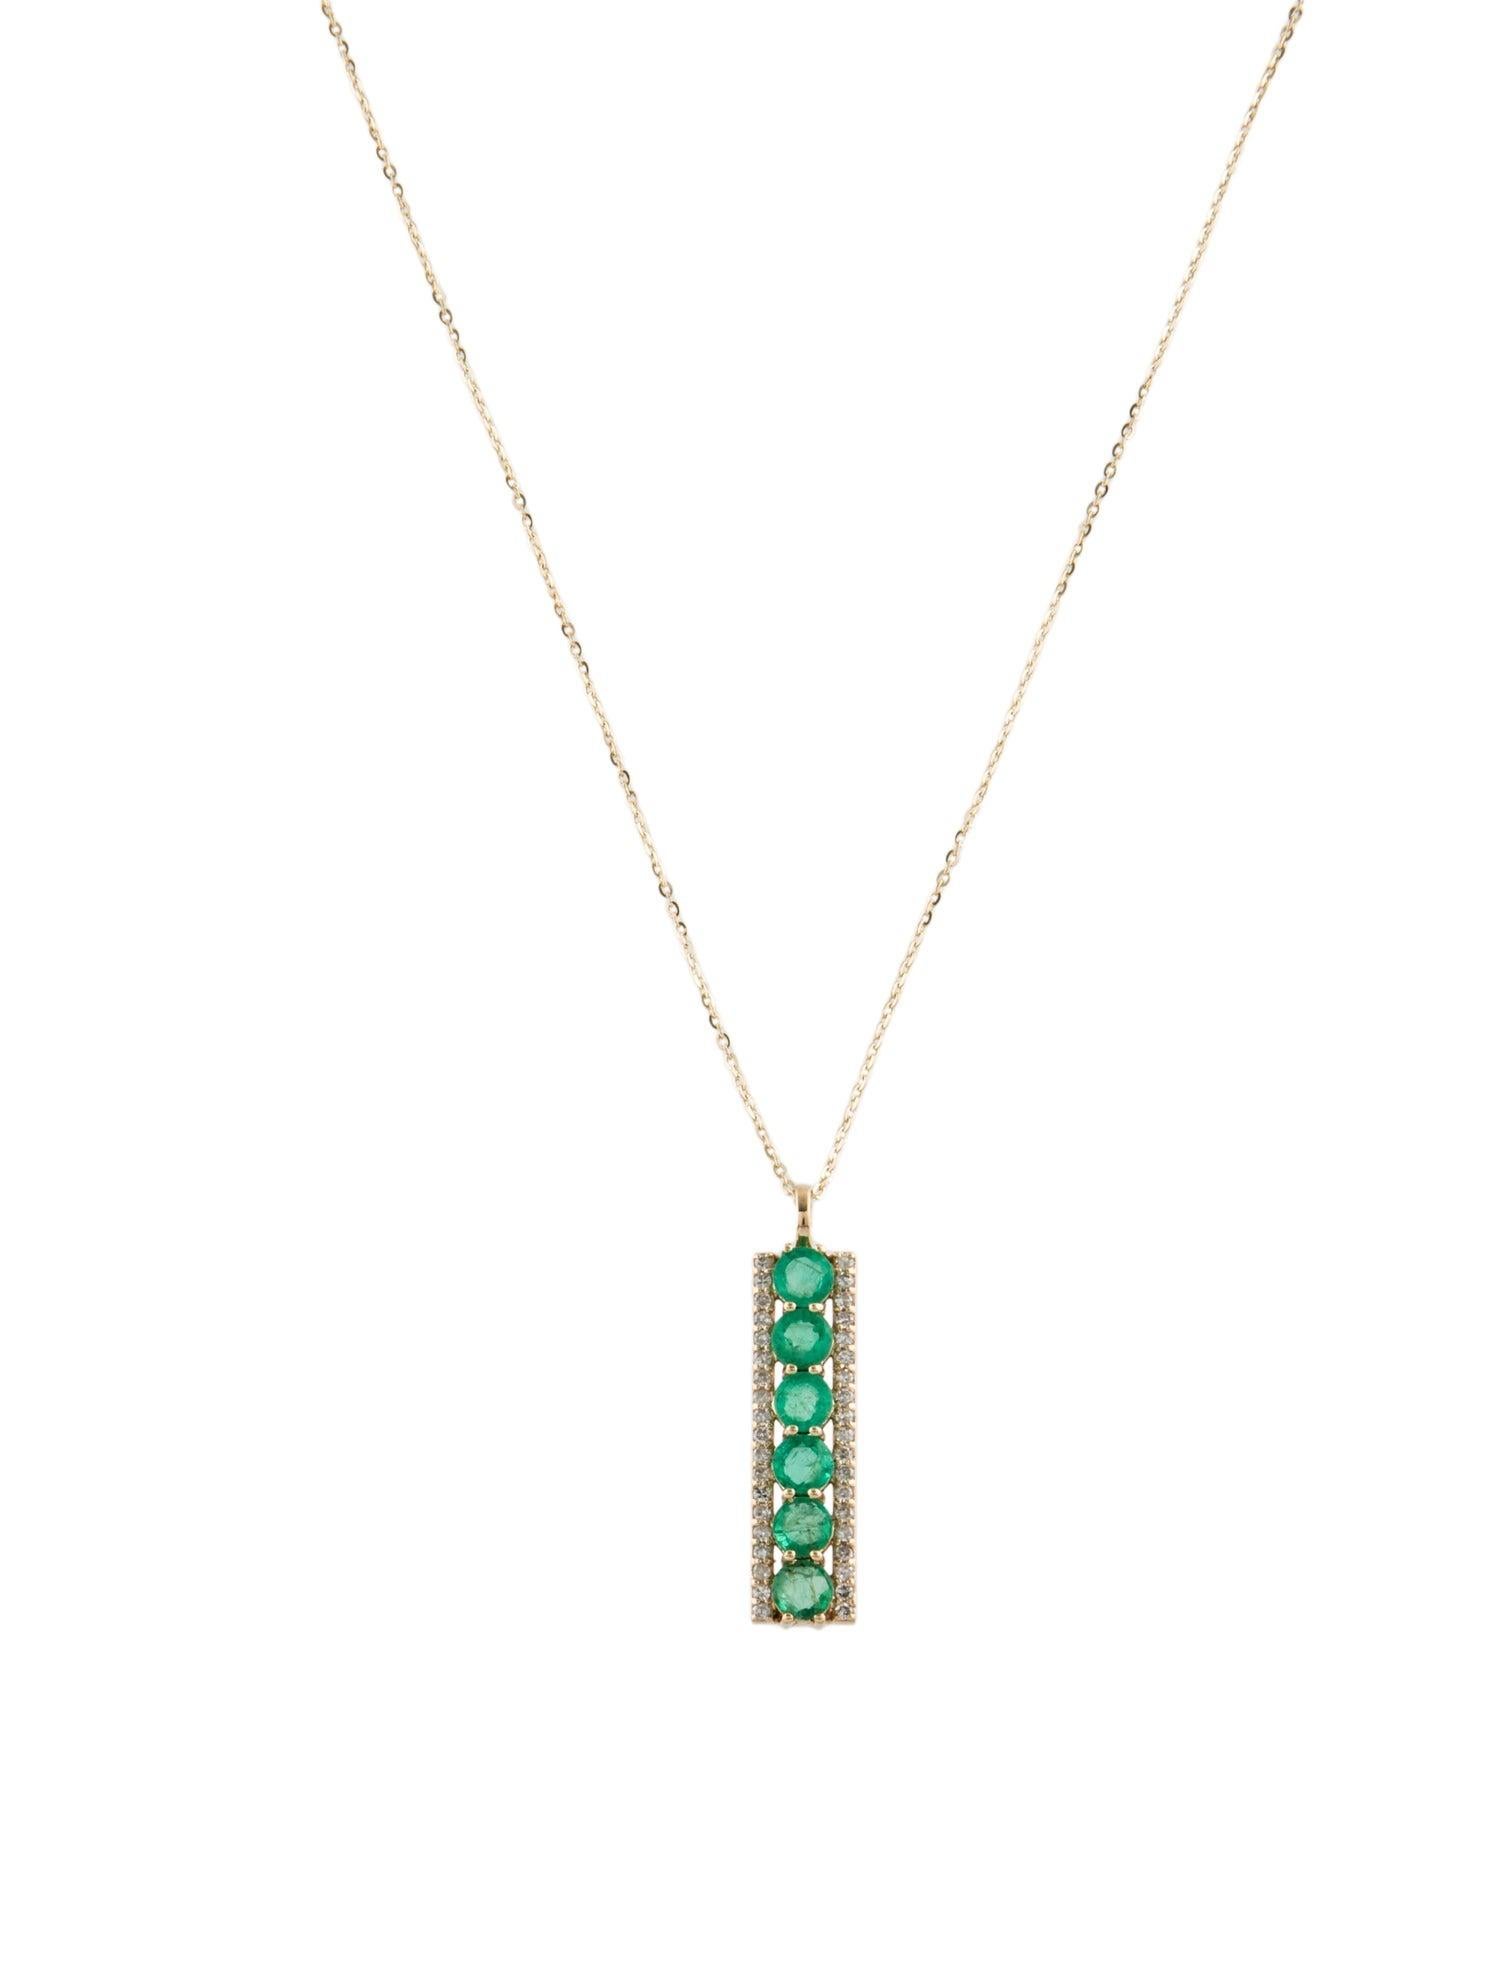 Immerse yourself in the enchanting allure of our Forest Ferns collection with this exquisite Emerald and Diamond Pendant from Jeweltique. Inspired by the verdant forests that grace our planet, this pendant captures the essence of nature's beauty in